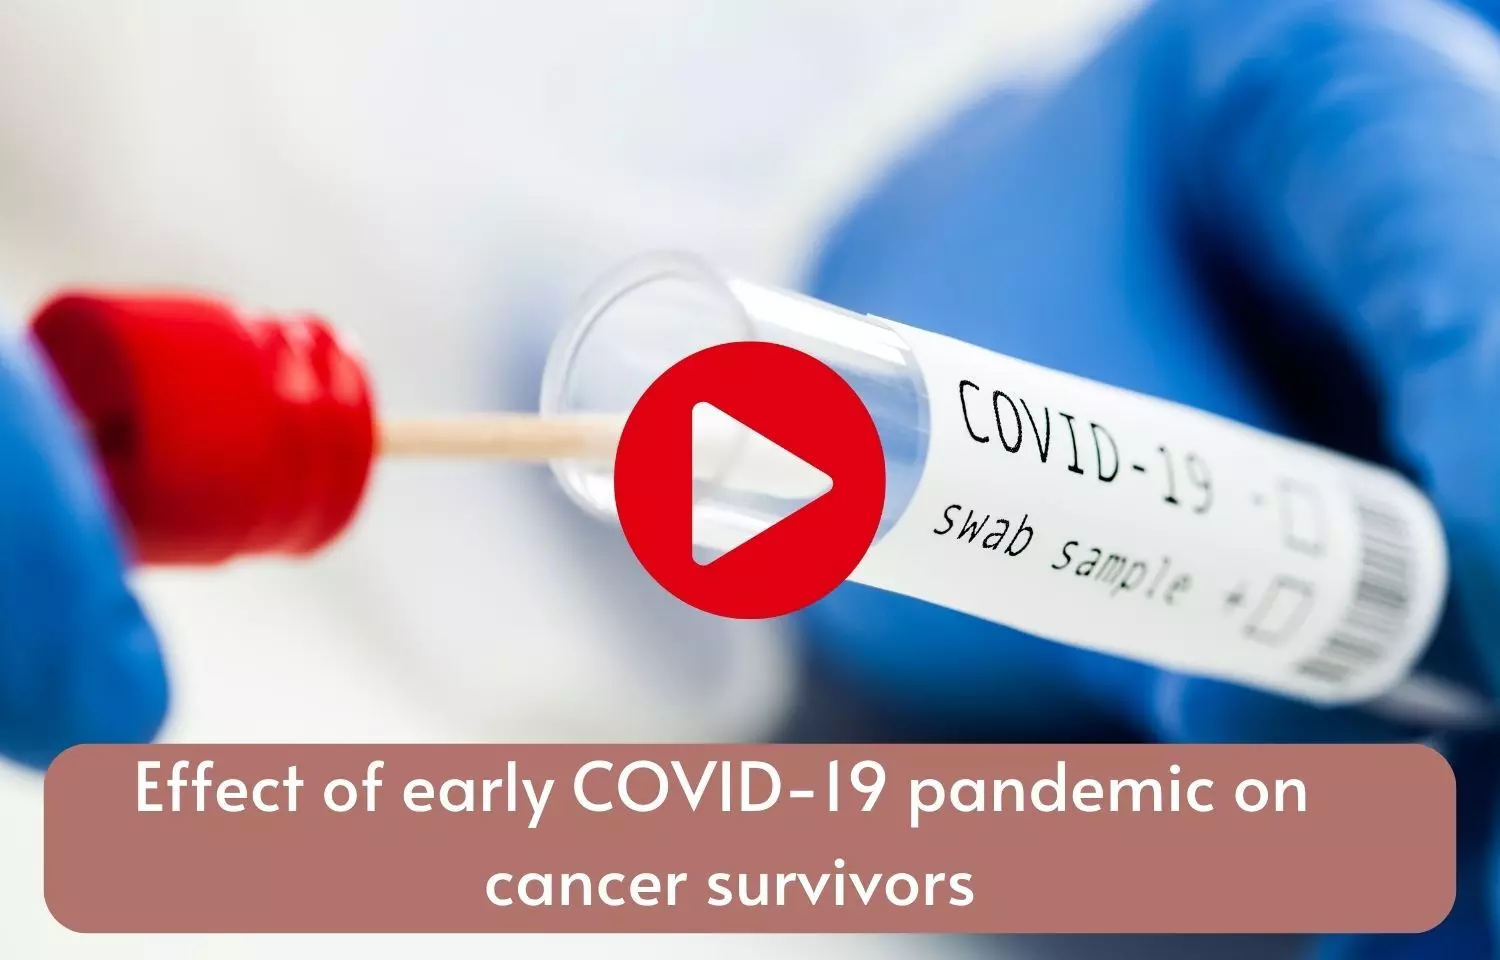 Effect of early COVID-19 pandemic on cancer survivors